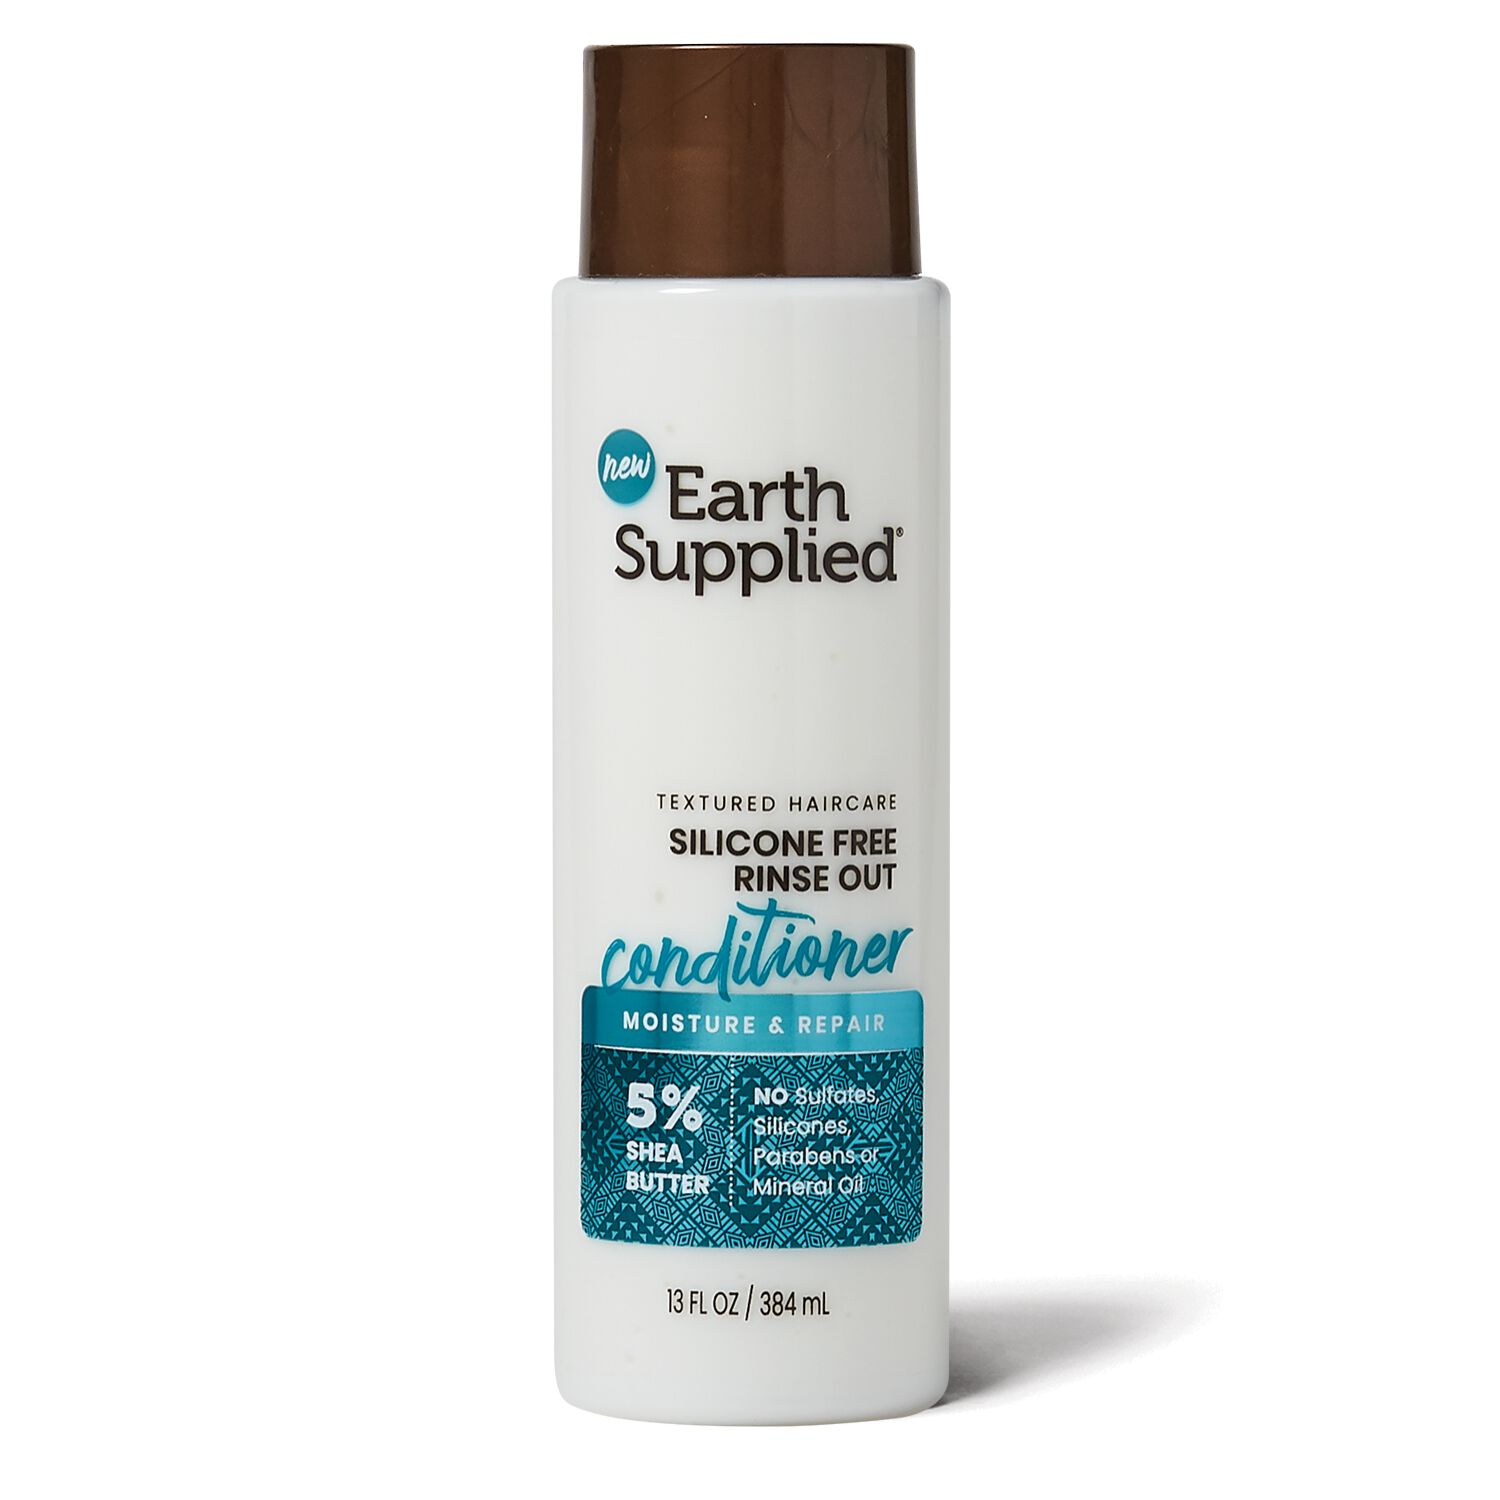 Earth Supplied Moisture & Repair Silicone Free Rinse Out Conditioner by